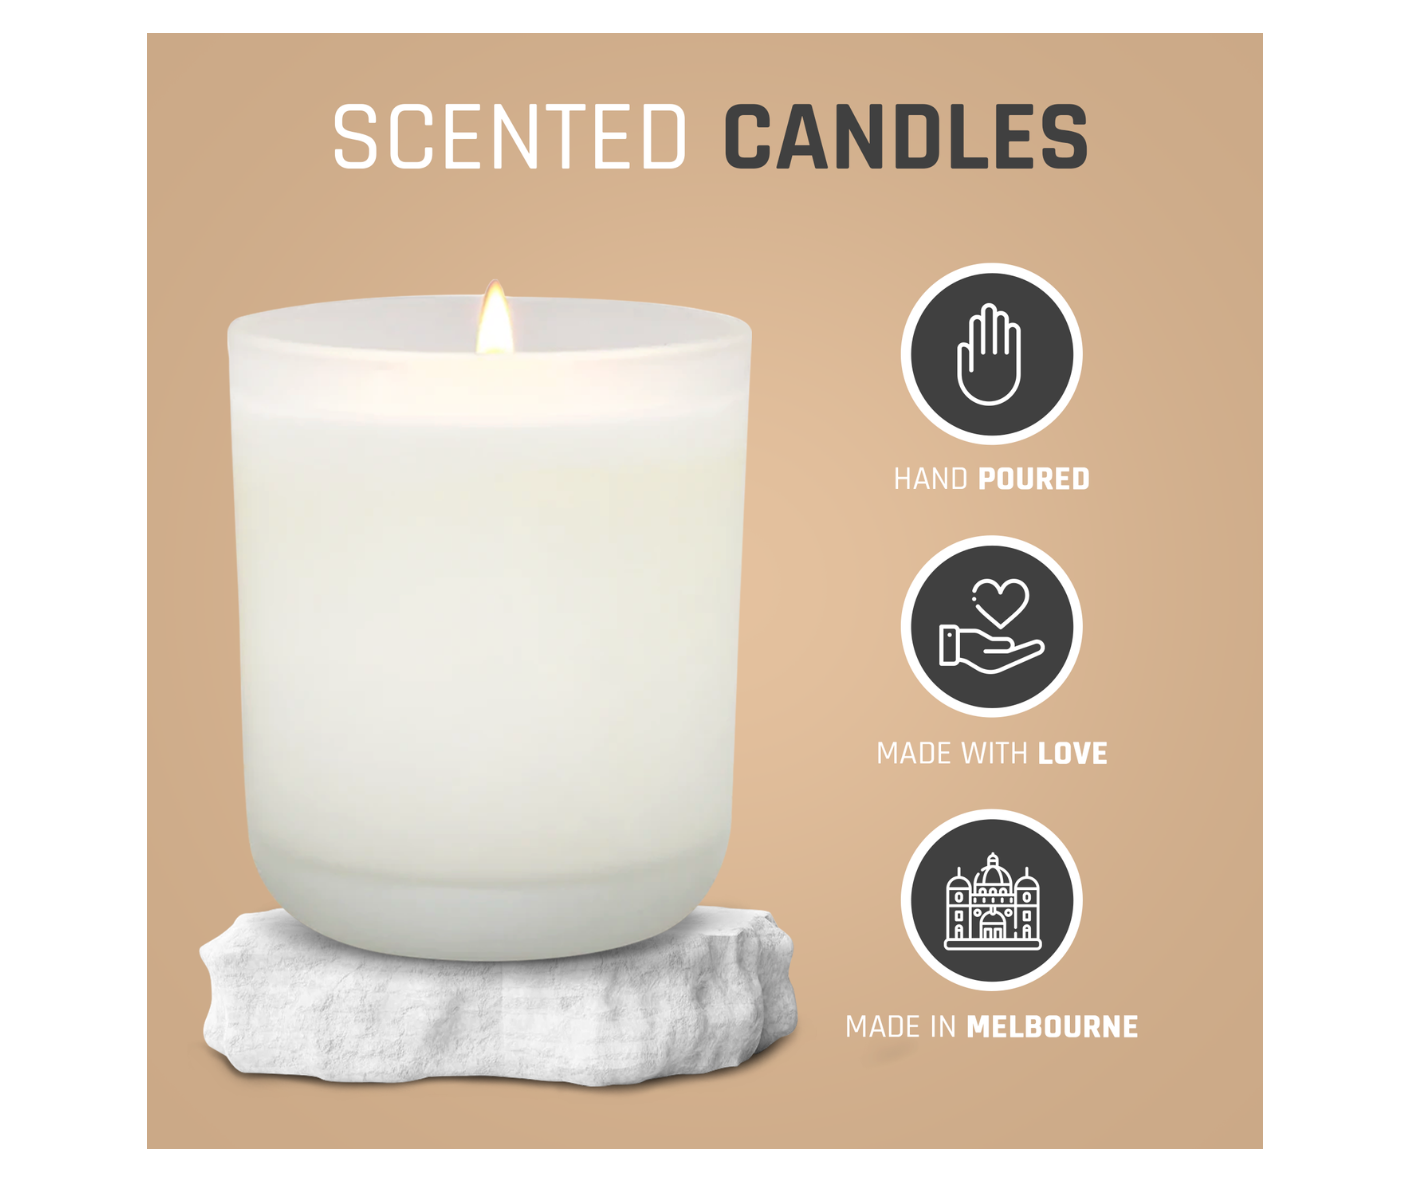 Wildfire Medium Soy Candle